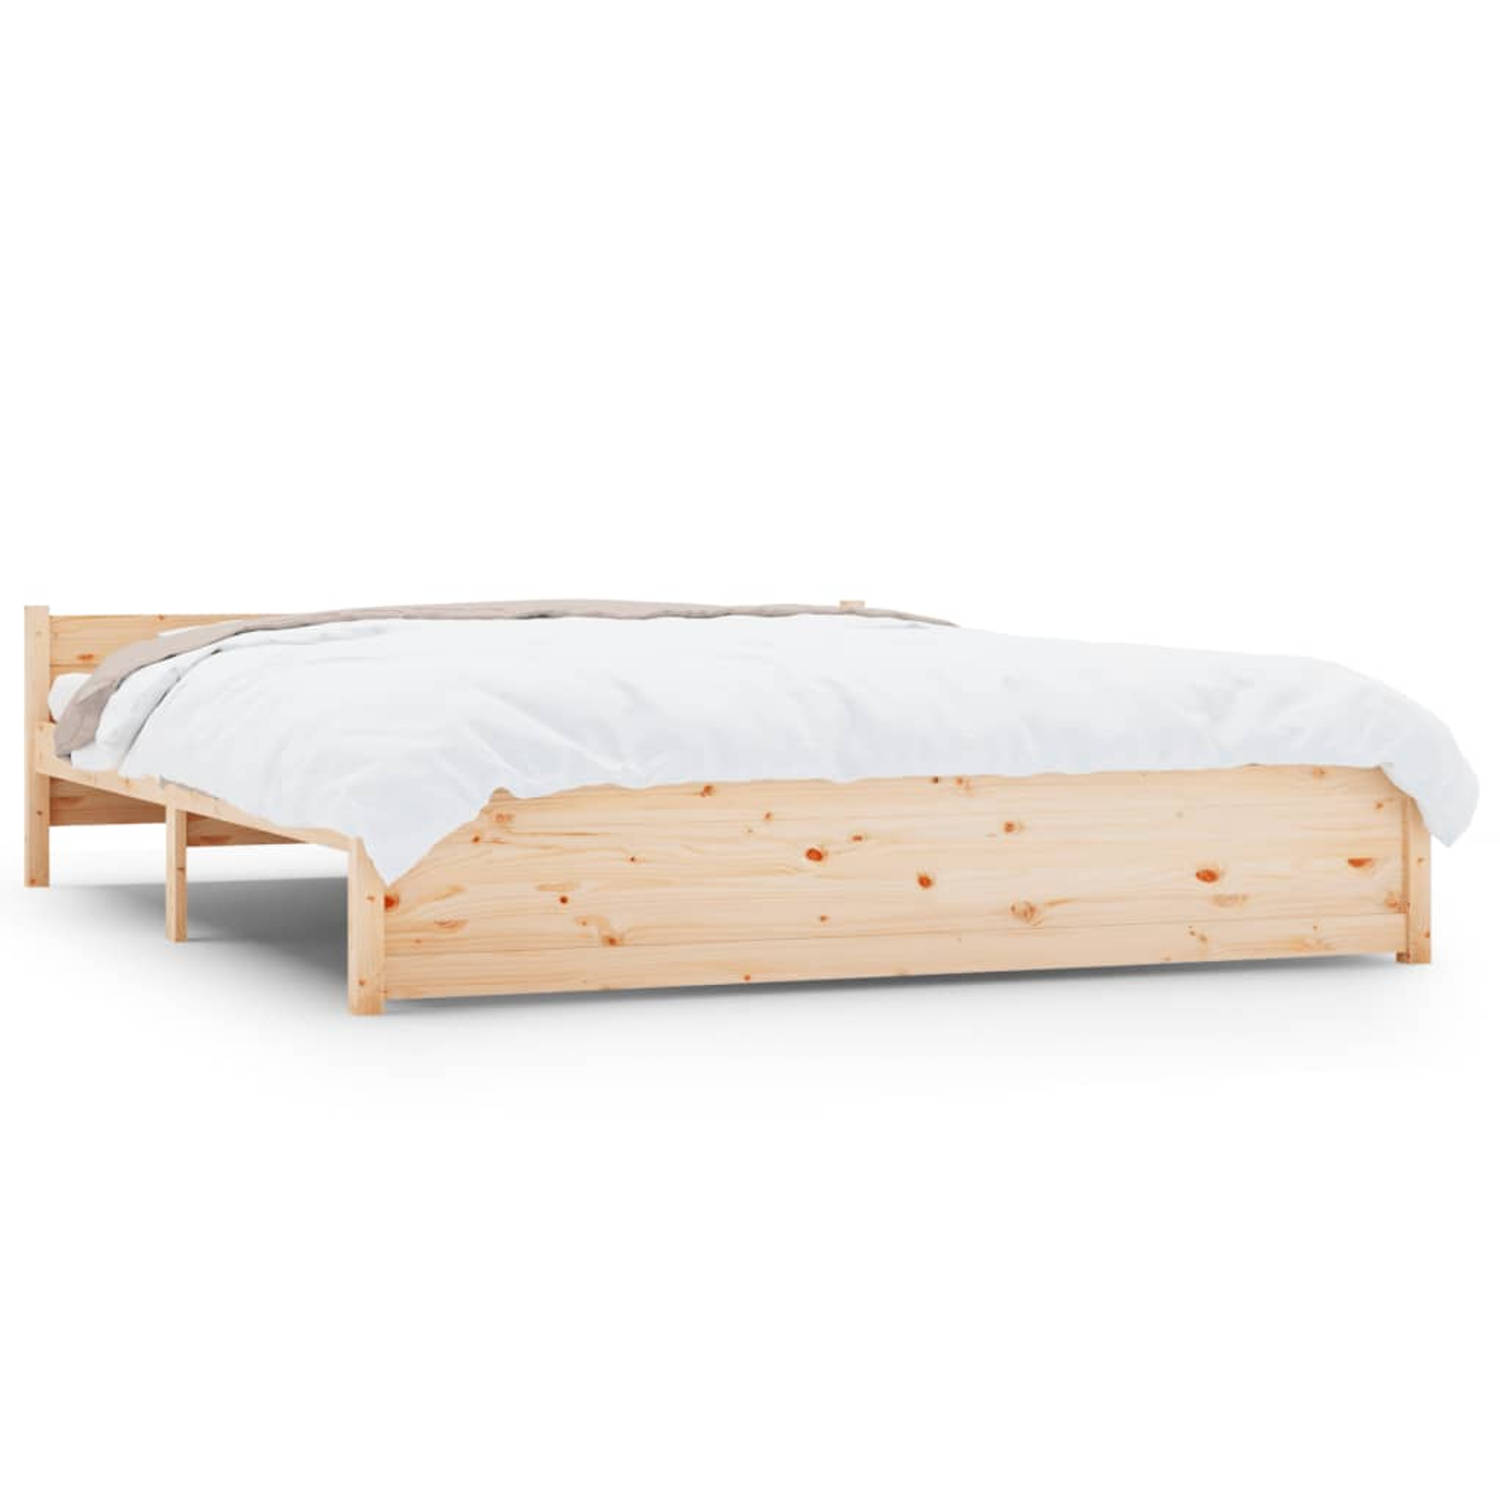 The Living Store Bedframe massief hout 160x200 cm - Bed